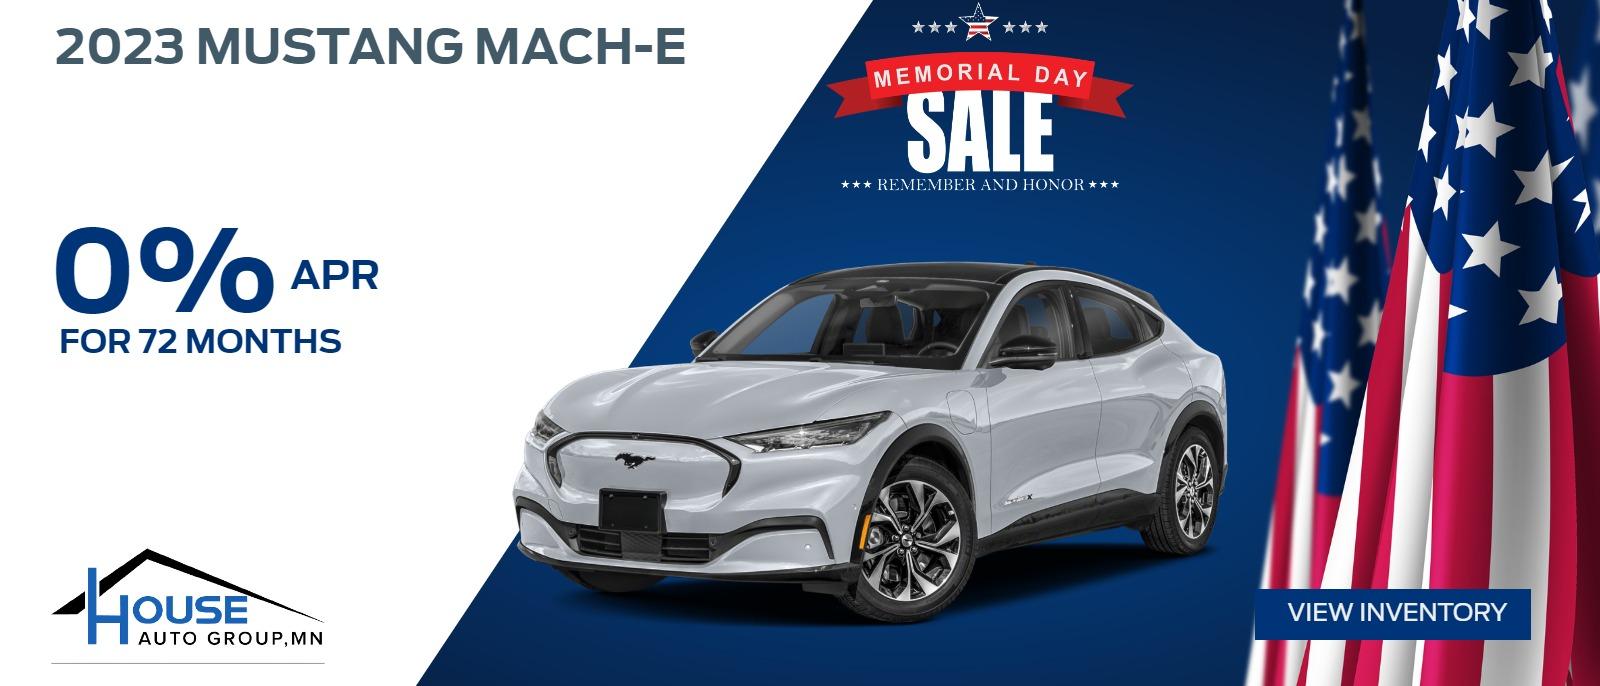 2023 Mustang Mach-E -- 0% APR / 72 Months! (for qualified buyers financing with Ford Credit, exp. 6/03)